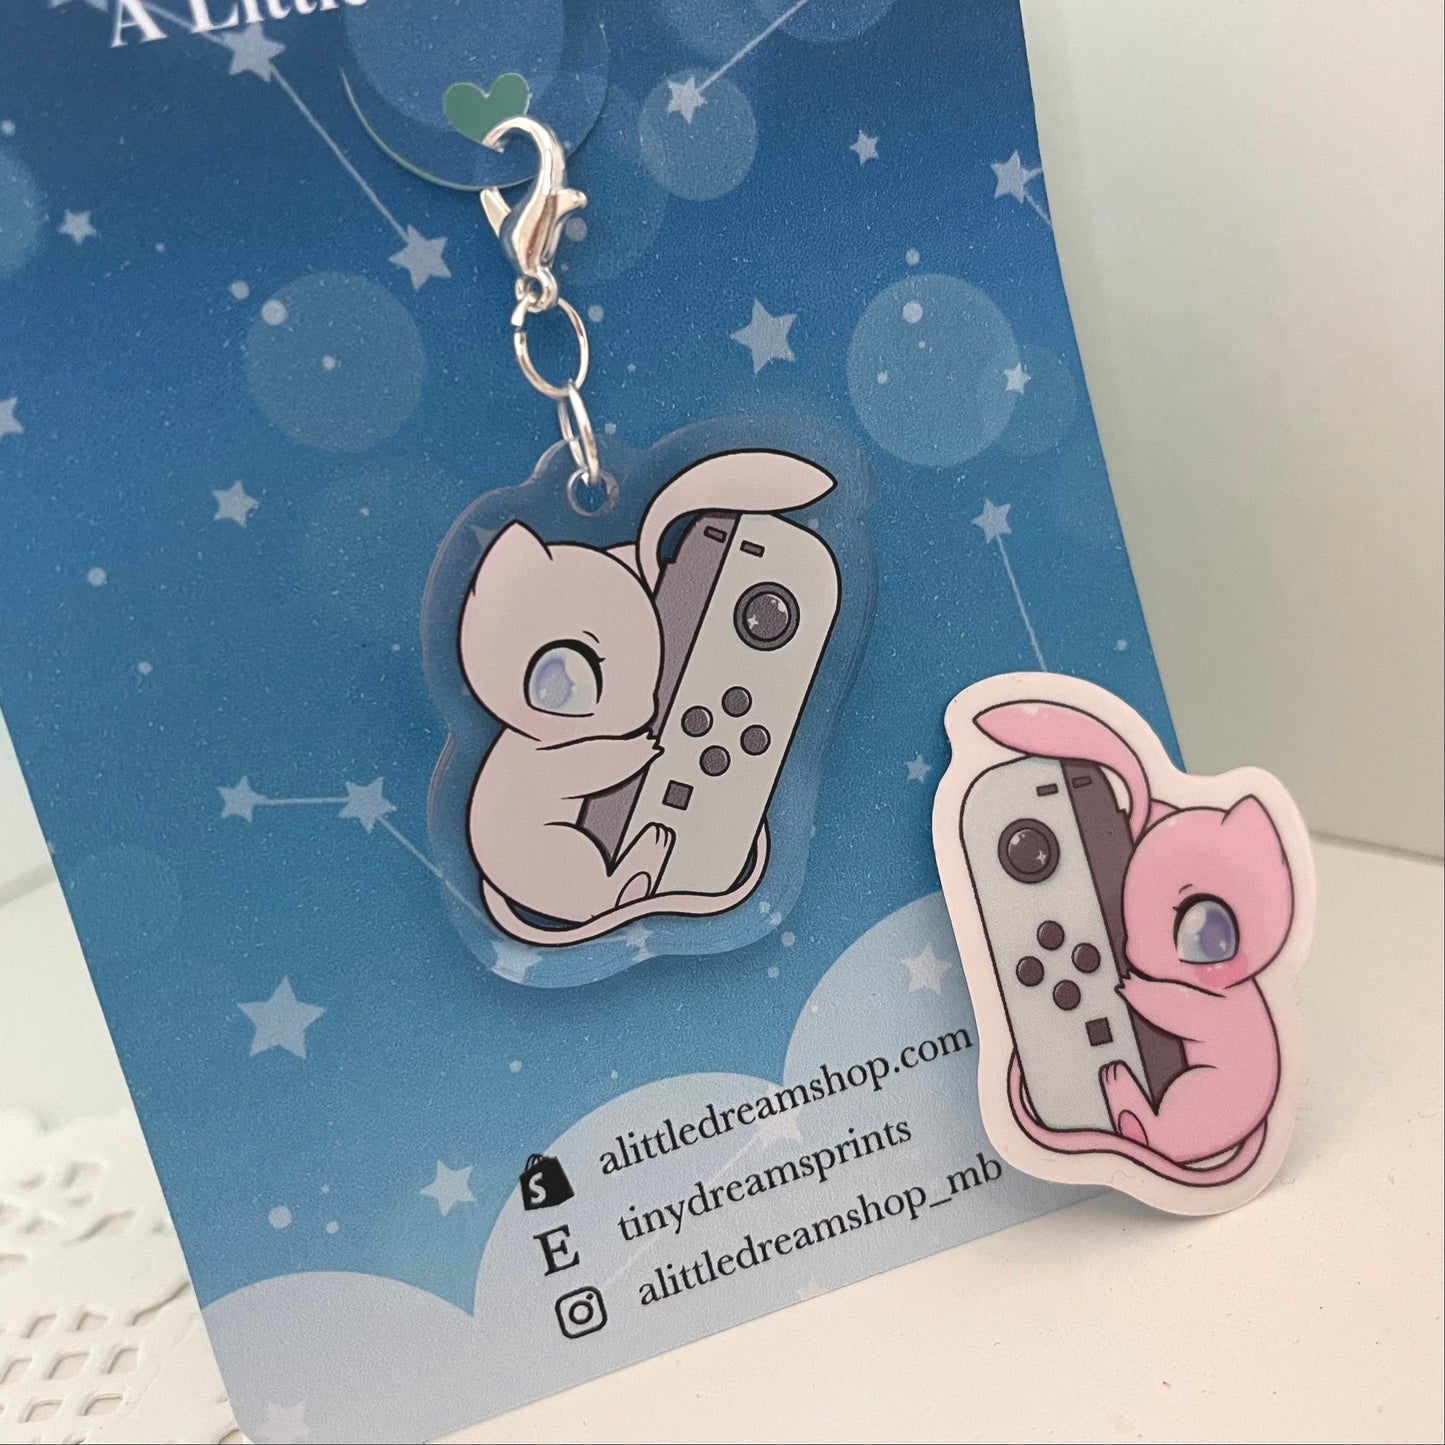 Special EDITION - Mew charm